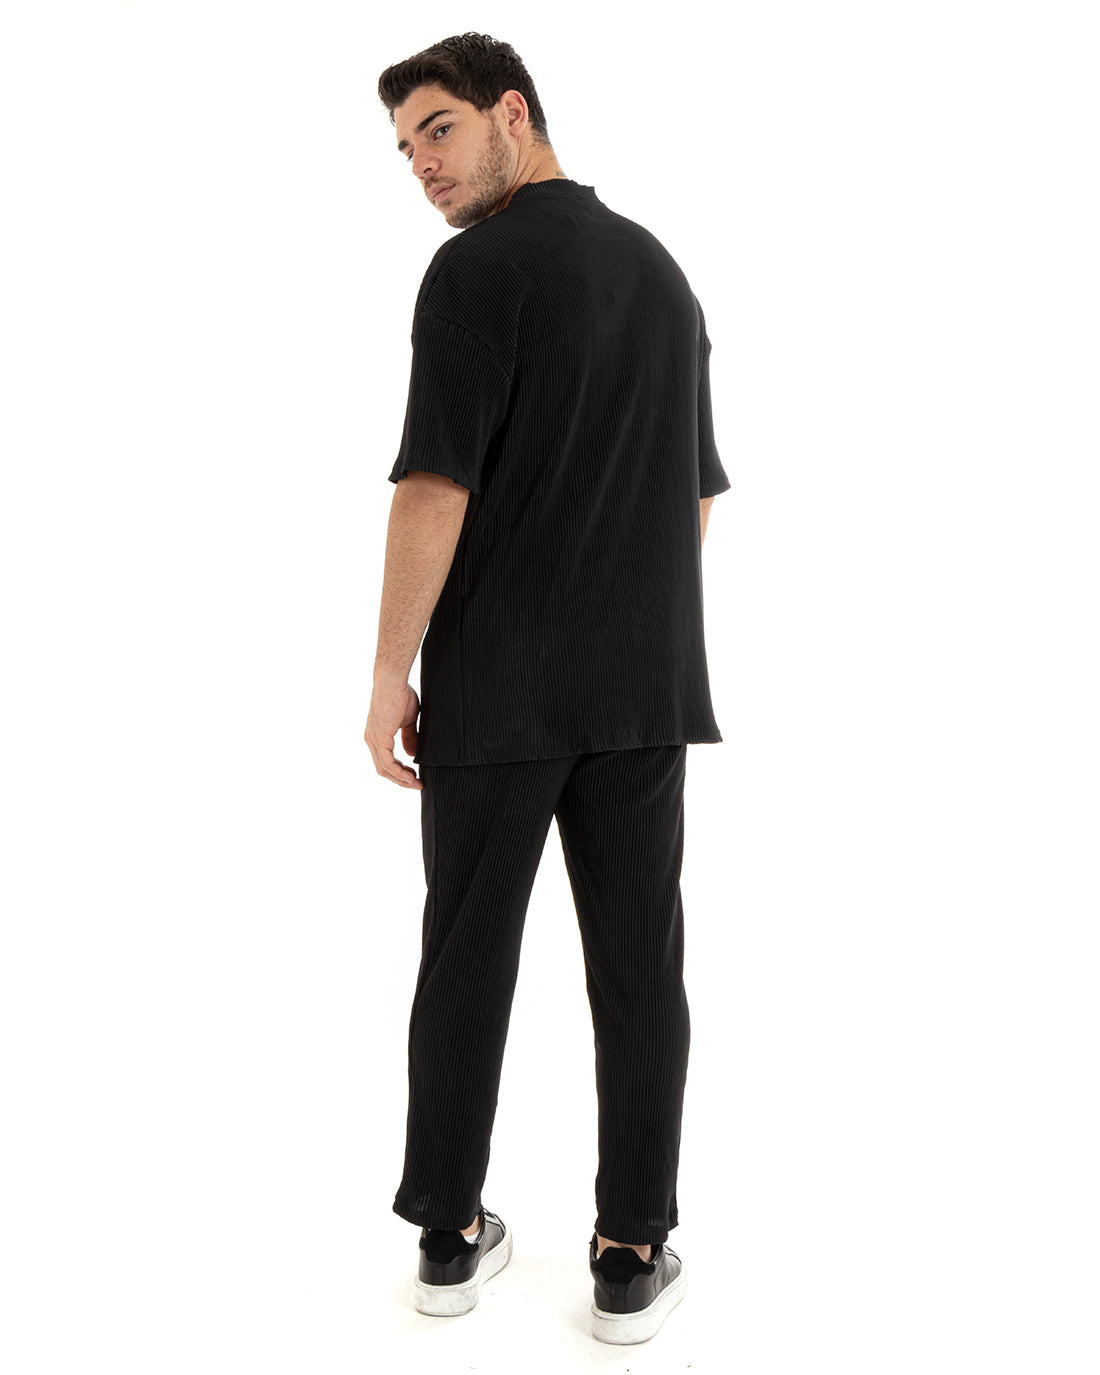 Complete Coordinated Set for Men Viscose Pleated T-Shirt Trousers Outfit Black GIOSAL-OU2285A